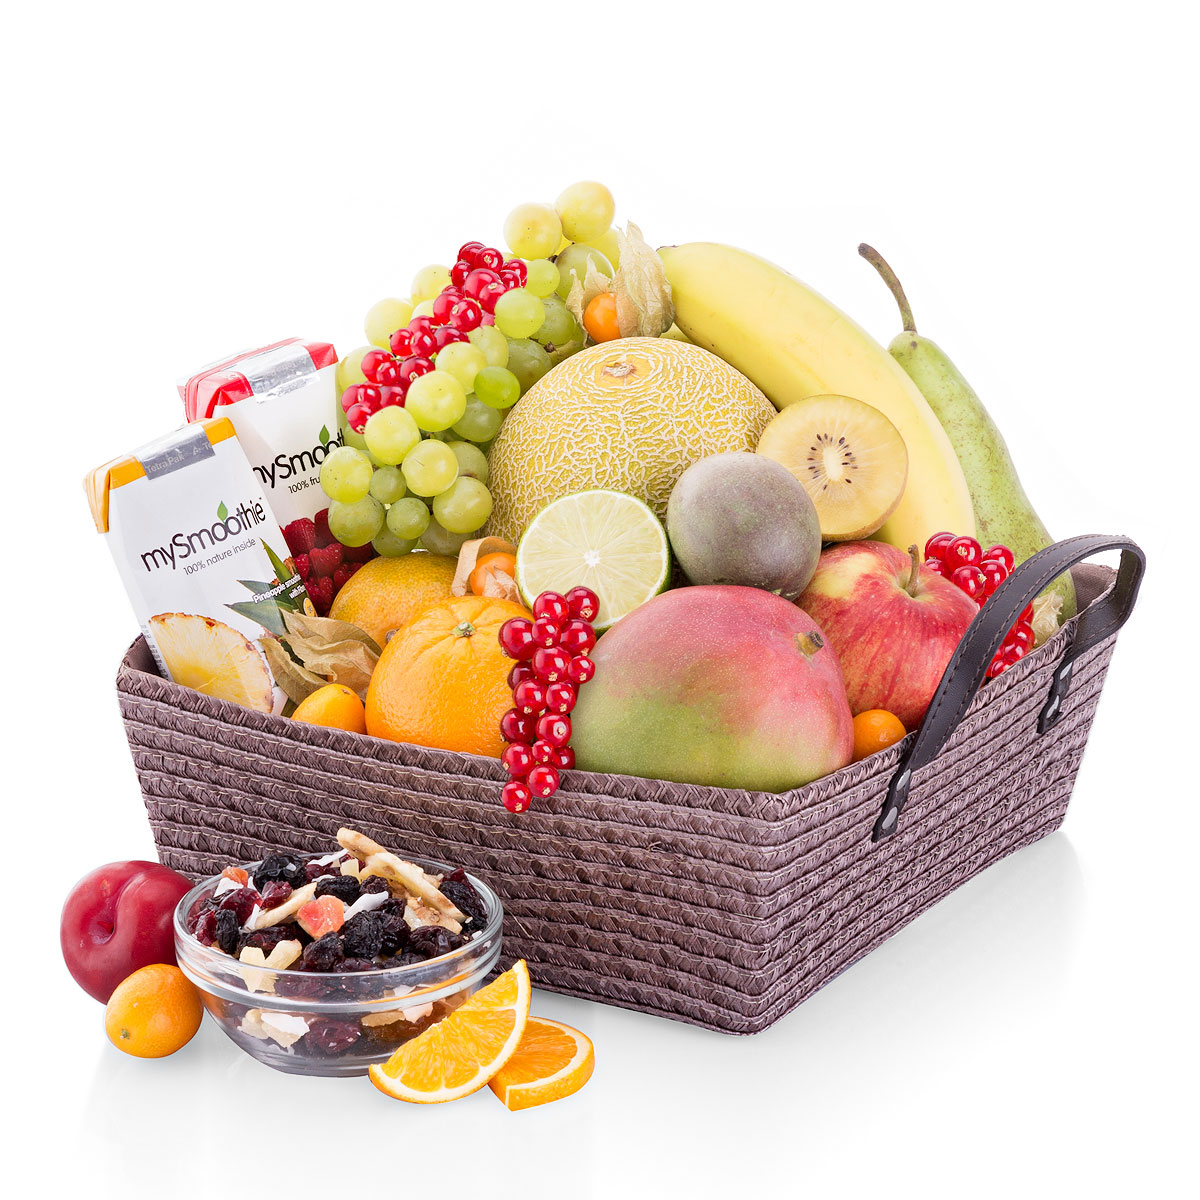 Fruit & Smoothie Gift Basket - Delivery in Belgium by GiftsForEurope